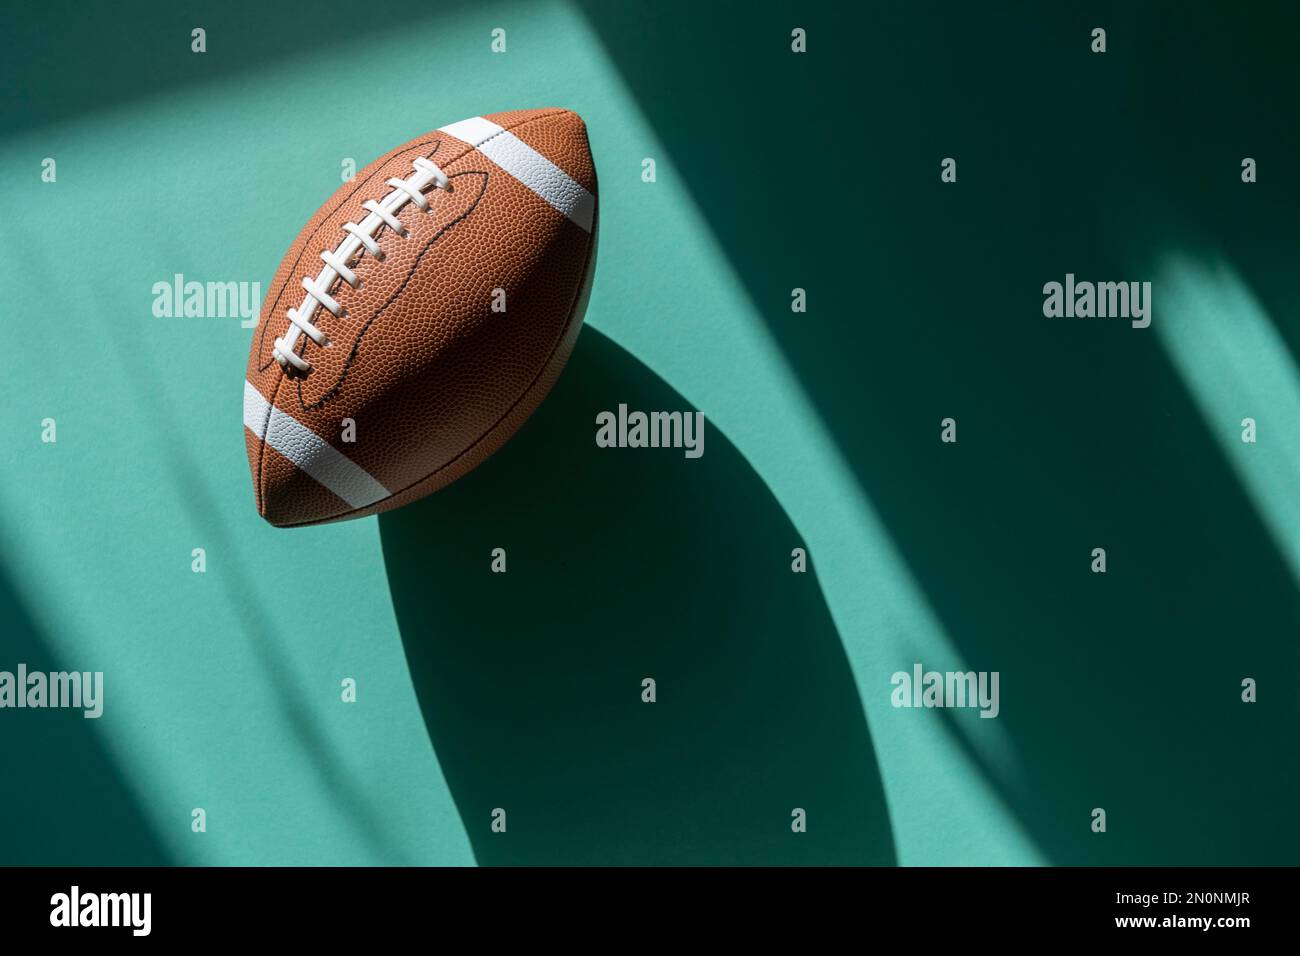 American football leather ball on mint color background. Top view. Game equipment horizontal sport theme poster, greeting cards, headers, website and Stock Photo